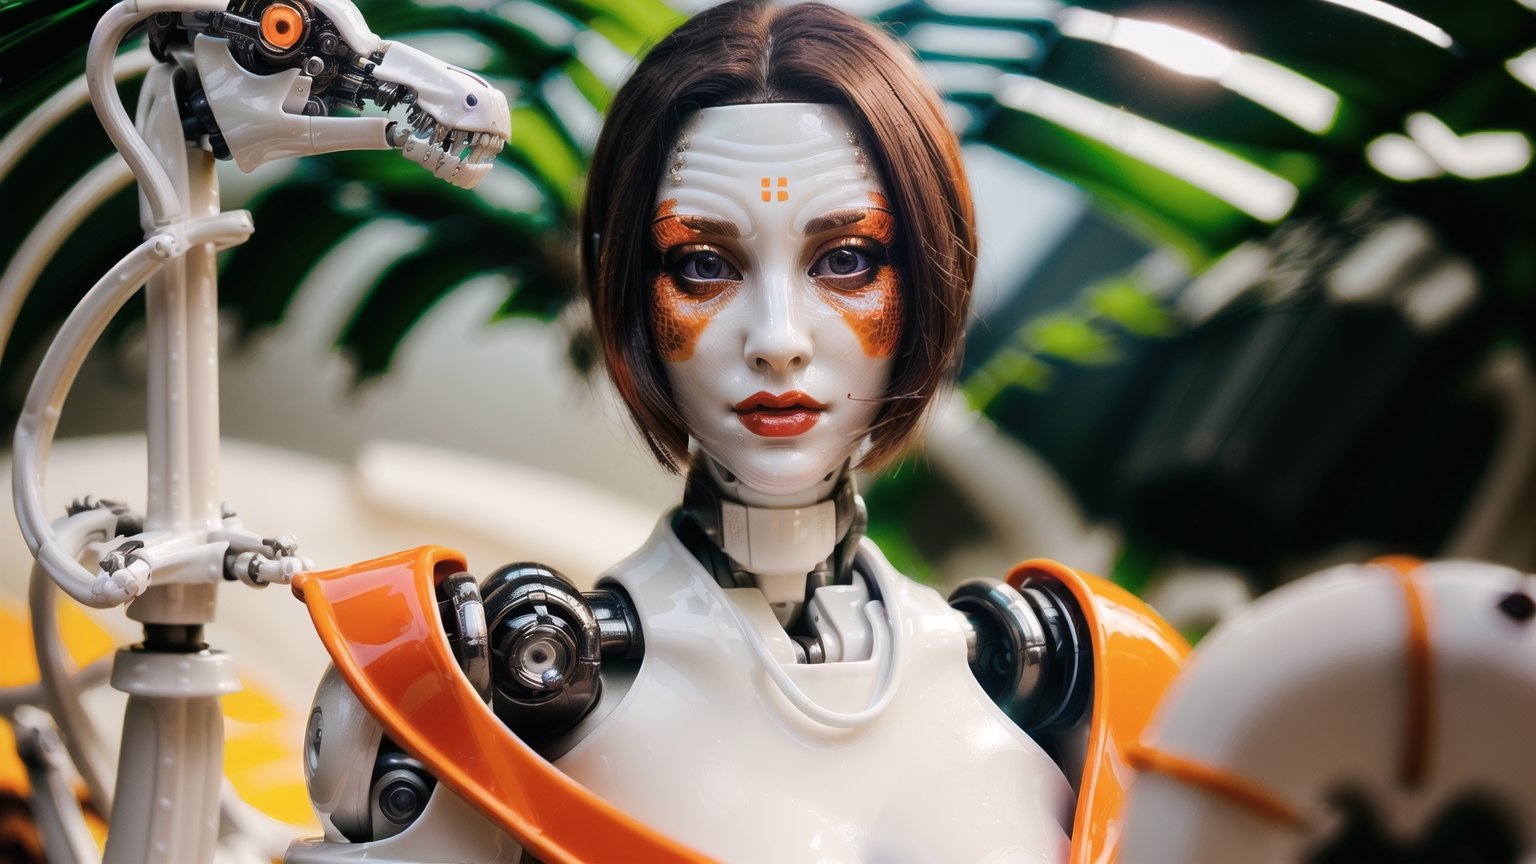 (((1 white glossy plastic android humanoid female cyborg with porcelain face dressed in orange dress))), ((stands at the huge mechanical dinosaur)), ((morning jungle nature background)), photorealistic, 8k, depth of field, masterpiece, extremely realistic photo, insanelly detailled, shot on Canon EOS 5D Mark IV DSLR, 85mm lens, award winning photograph, 